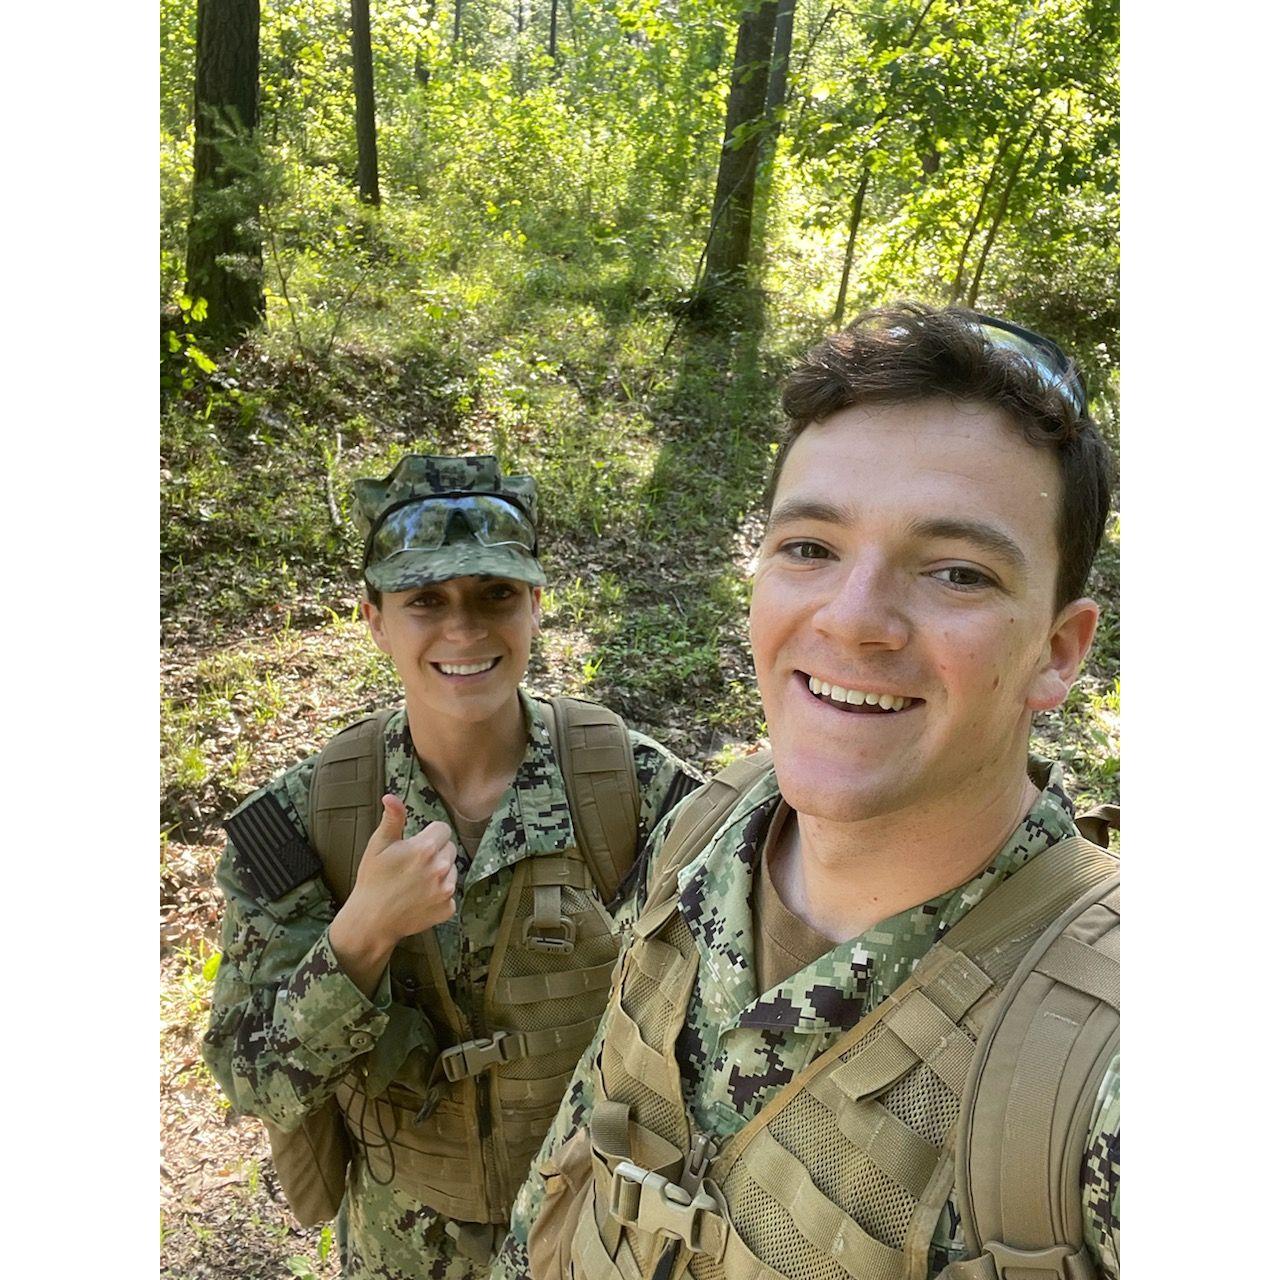 This past summer at a Marine Corps training. A coincidental meet up during land navigation practice